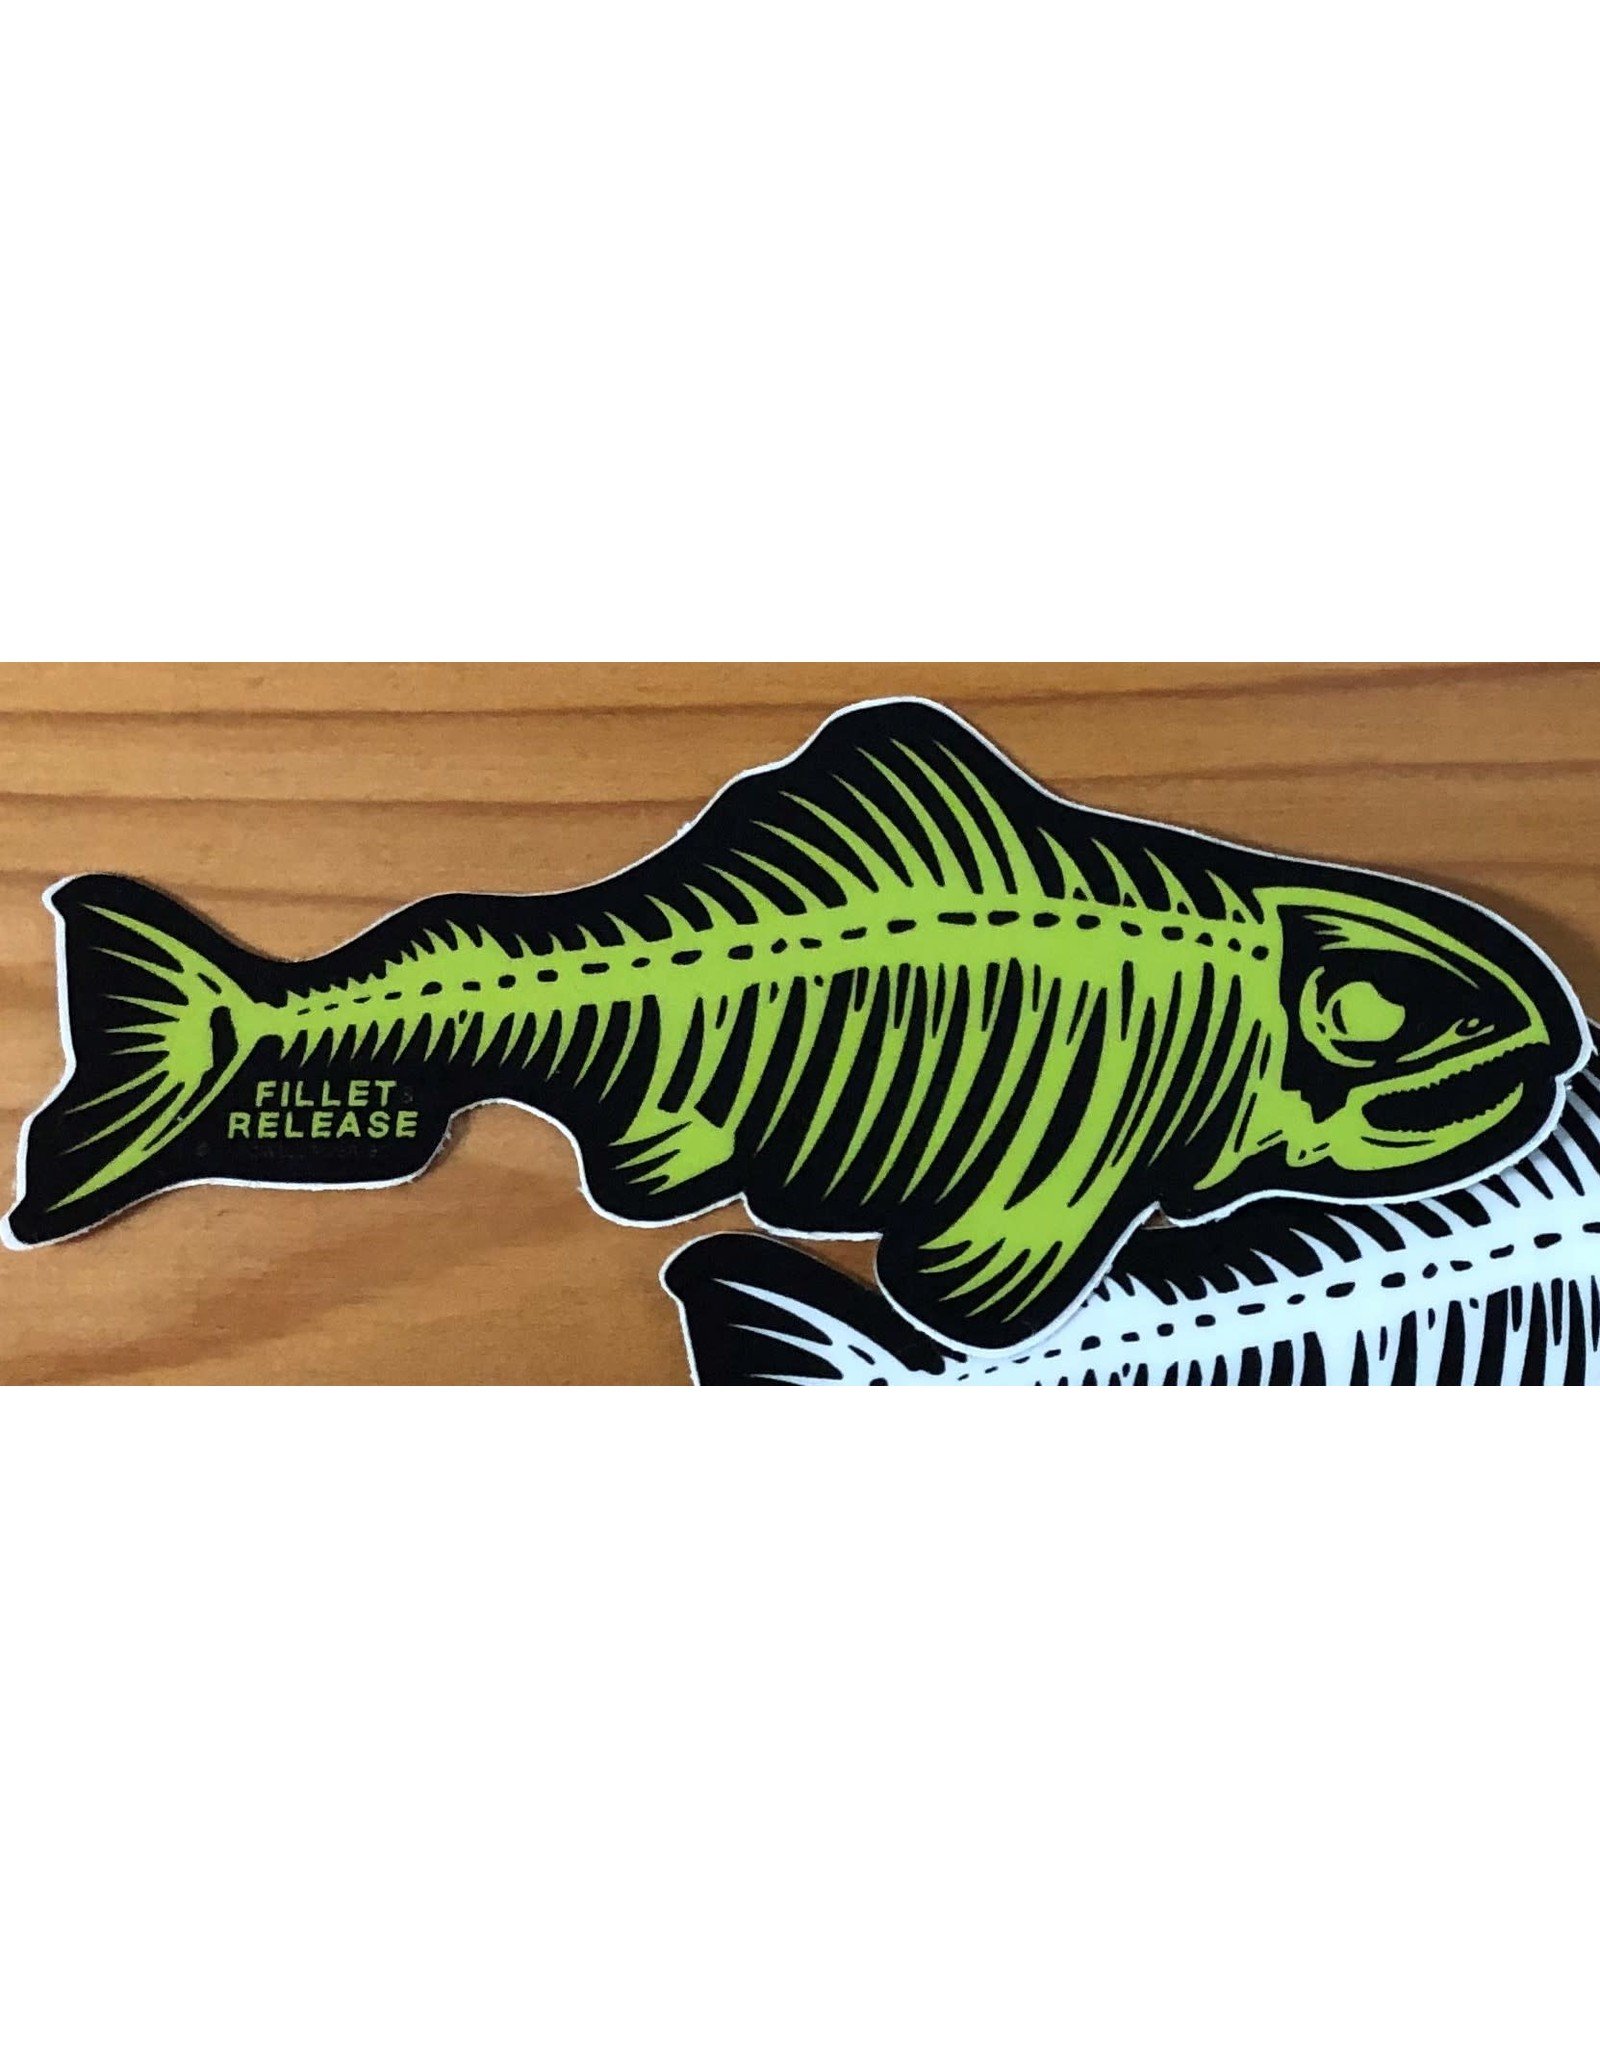 PRO SMALL FILLET & RELEASE FISH DECAL